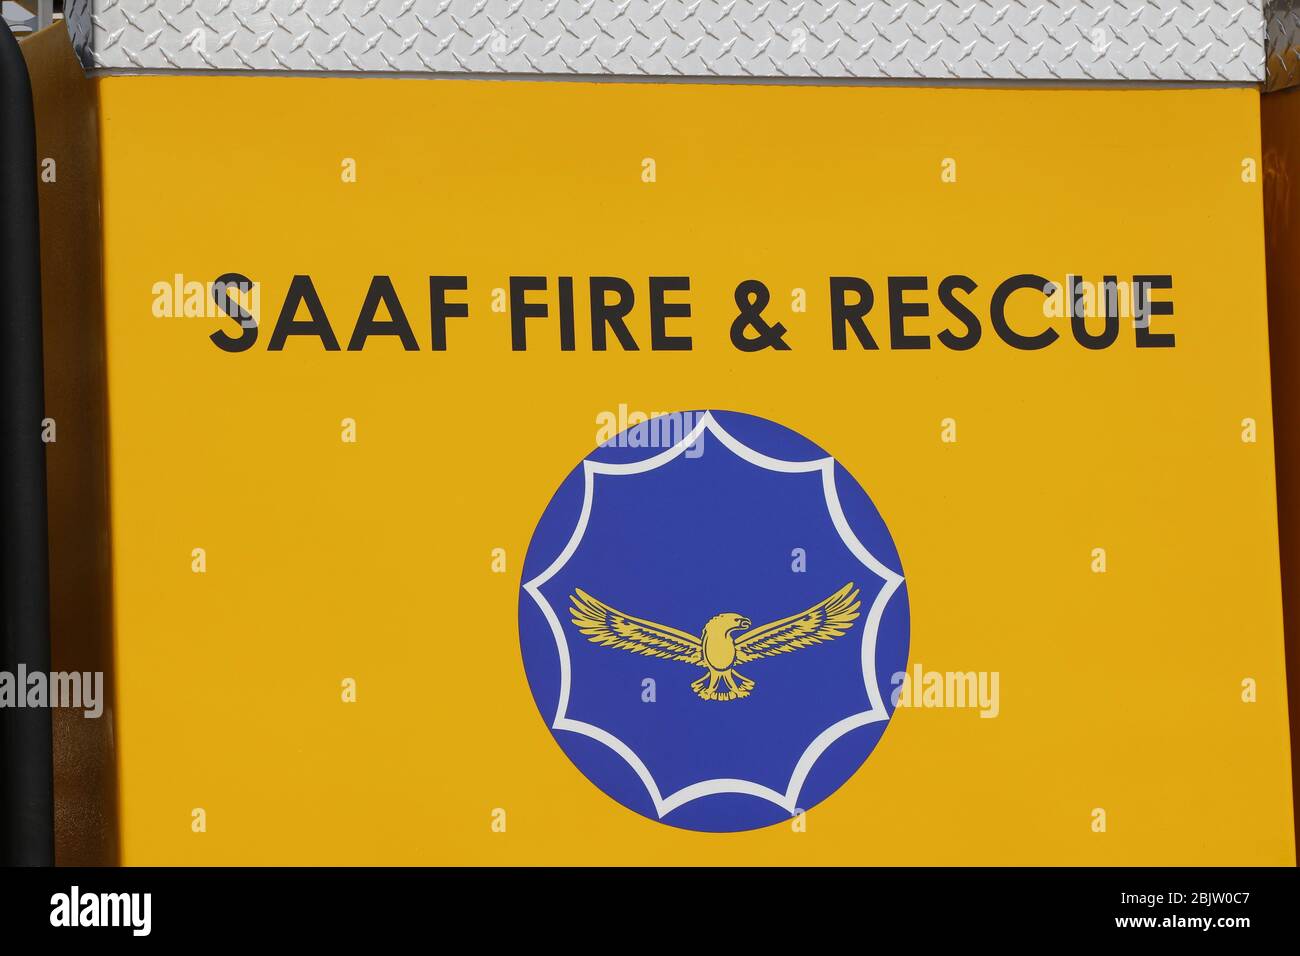 SAAF Fire & Rescue Stock Photo